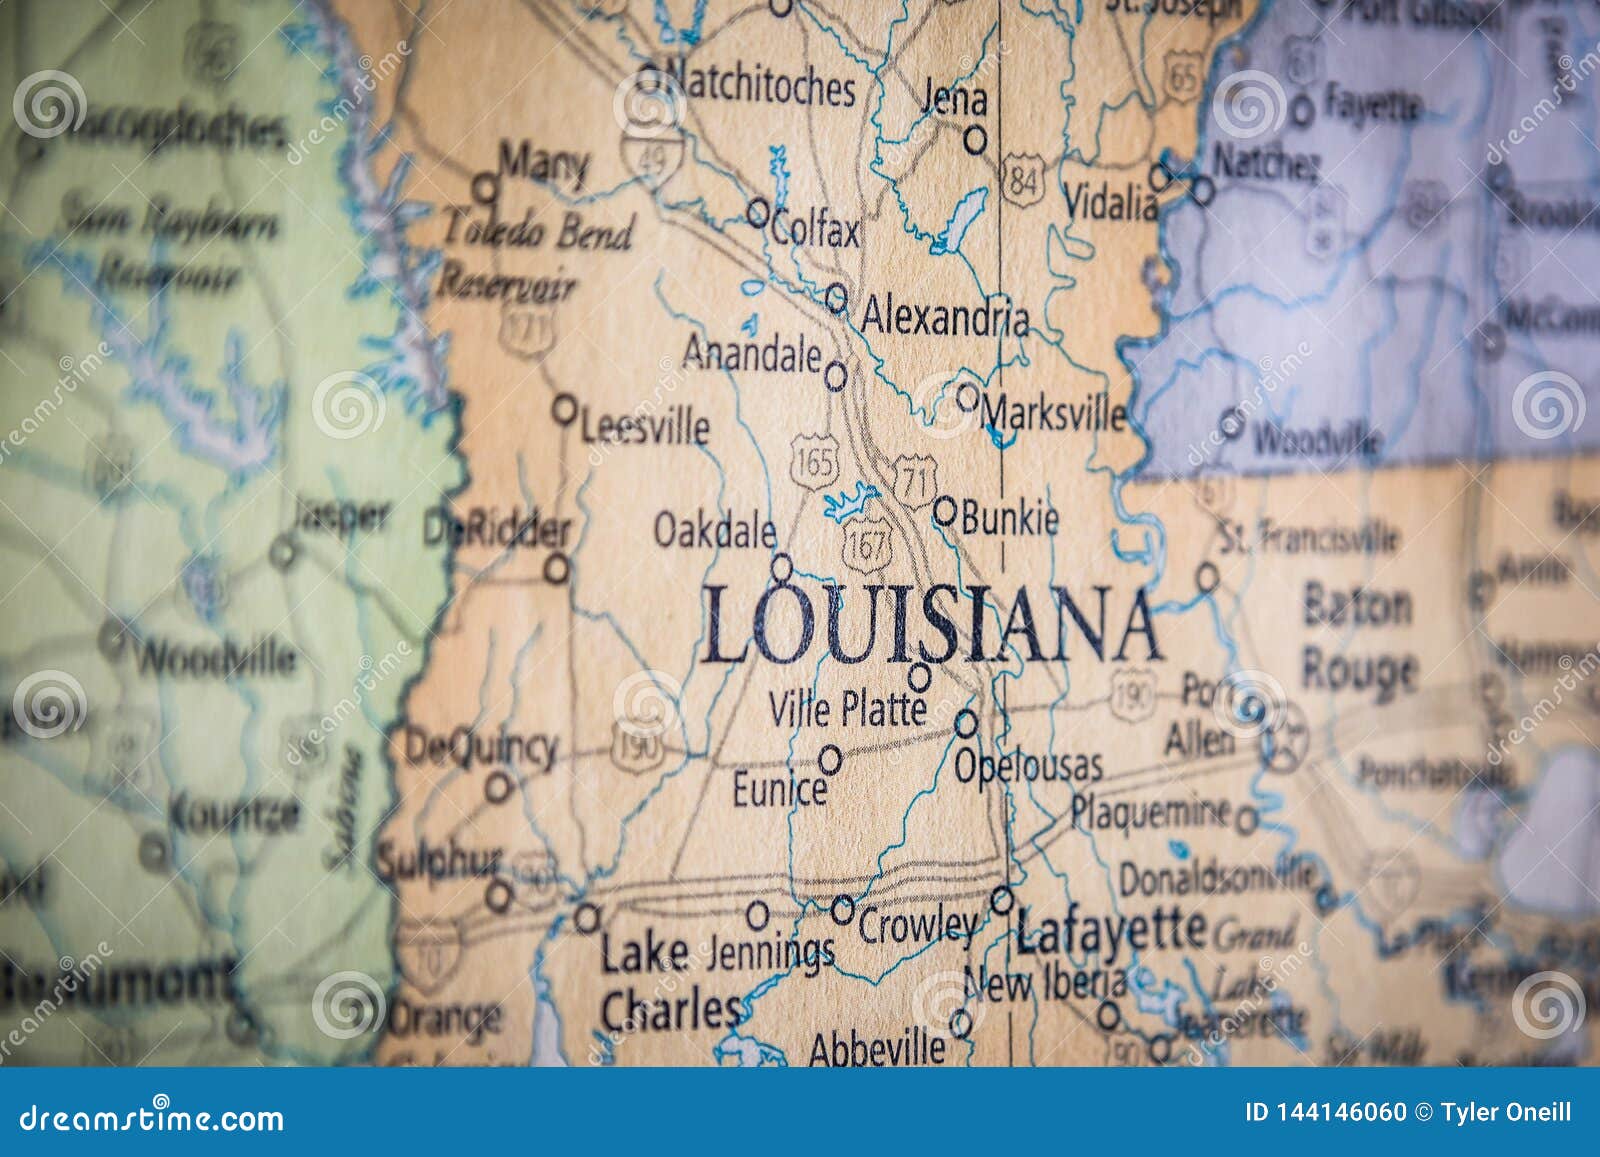 selective focus of louisiana state on a geographical and political state map of the usa